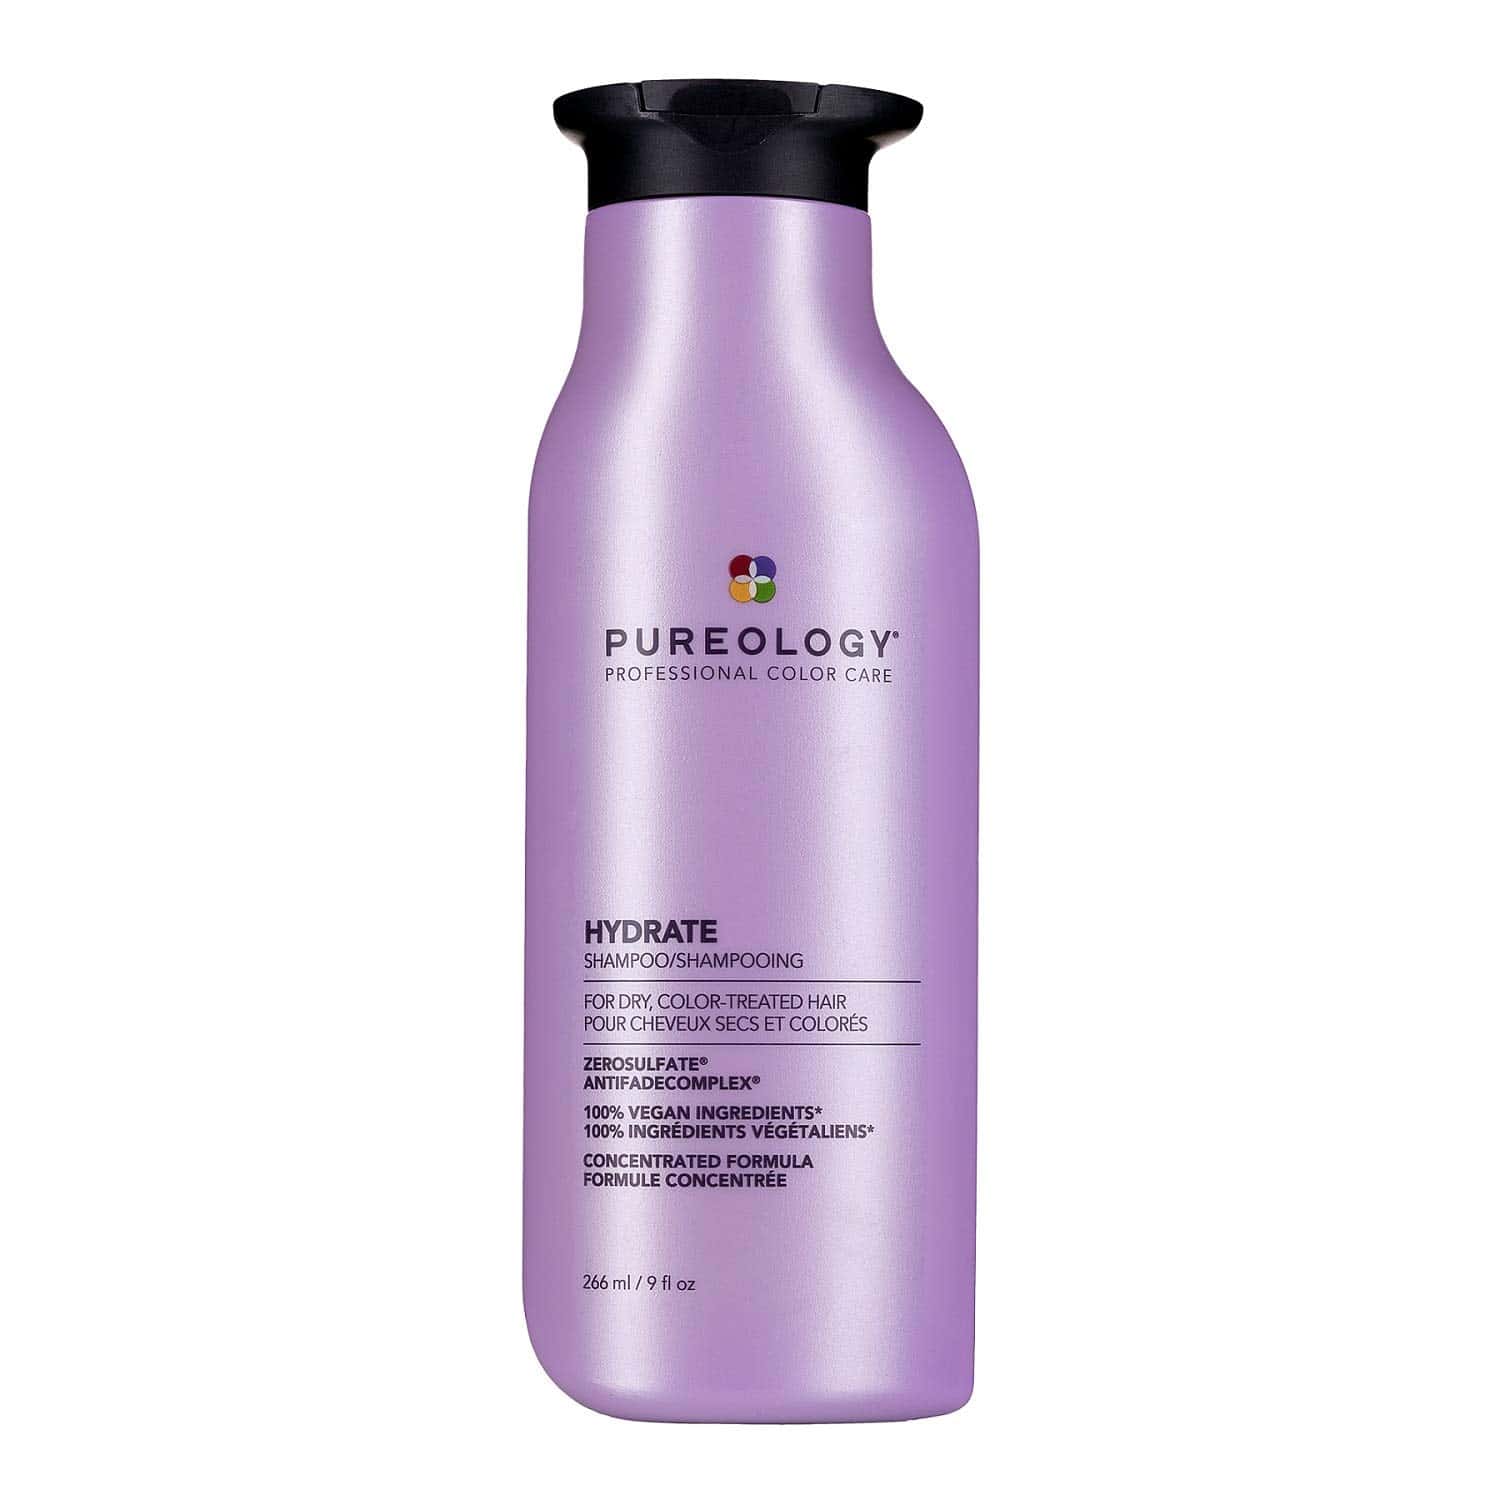 krave session Delvis Pureology Hydrate Shampoo | Sisters Salon & Day Spa